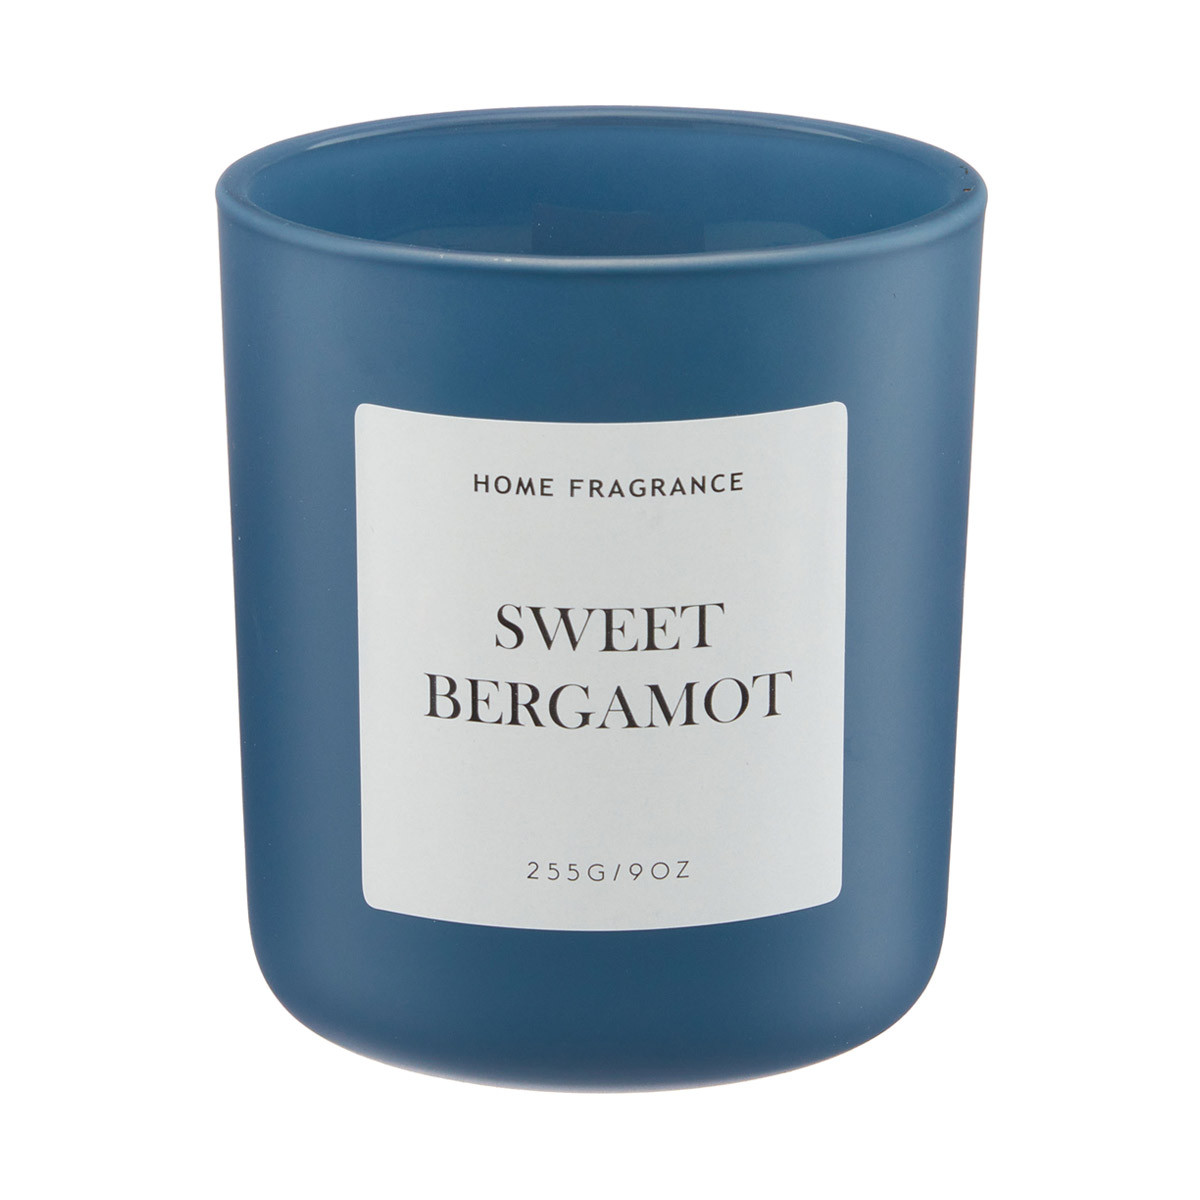 Home Fragrance Sweet Bergamot Scented Candle